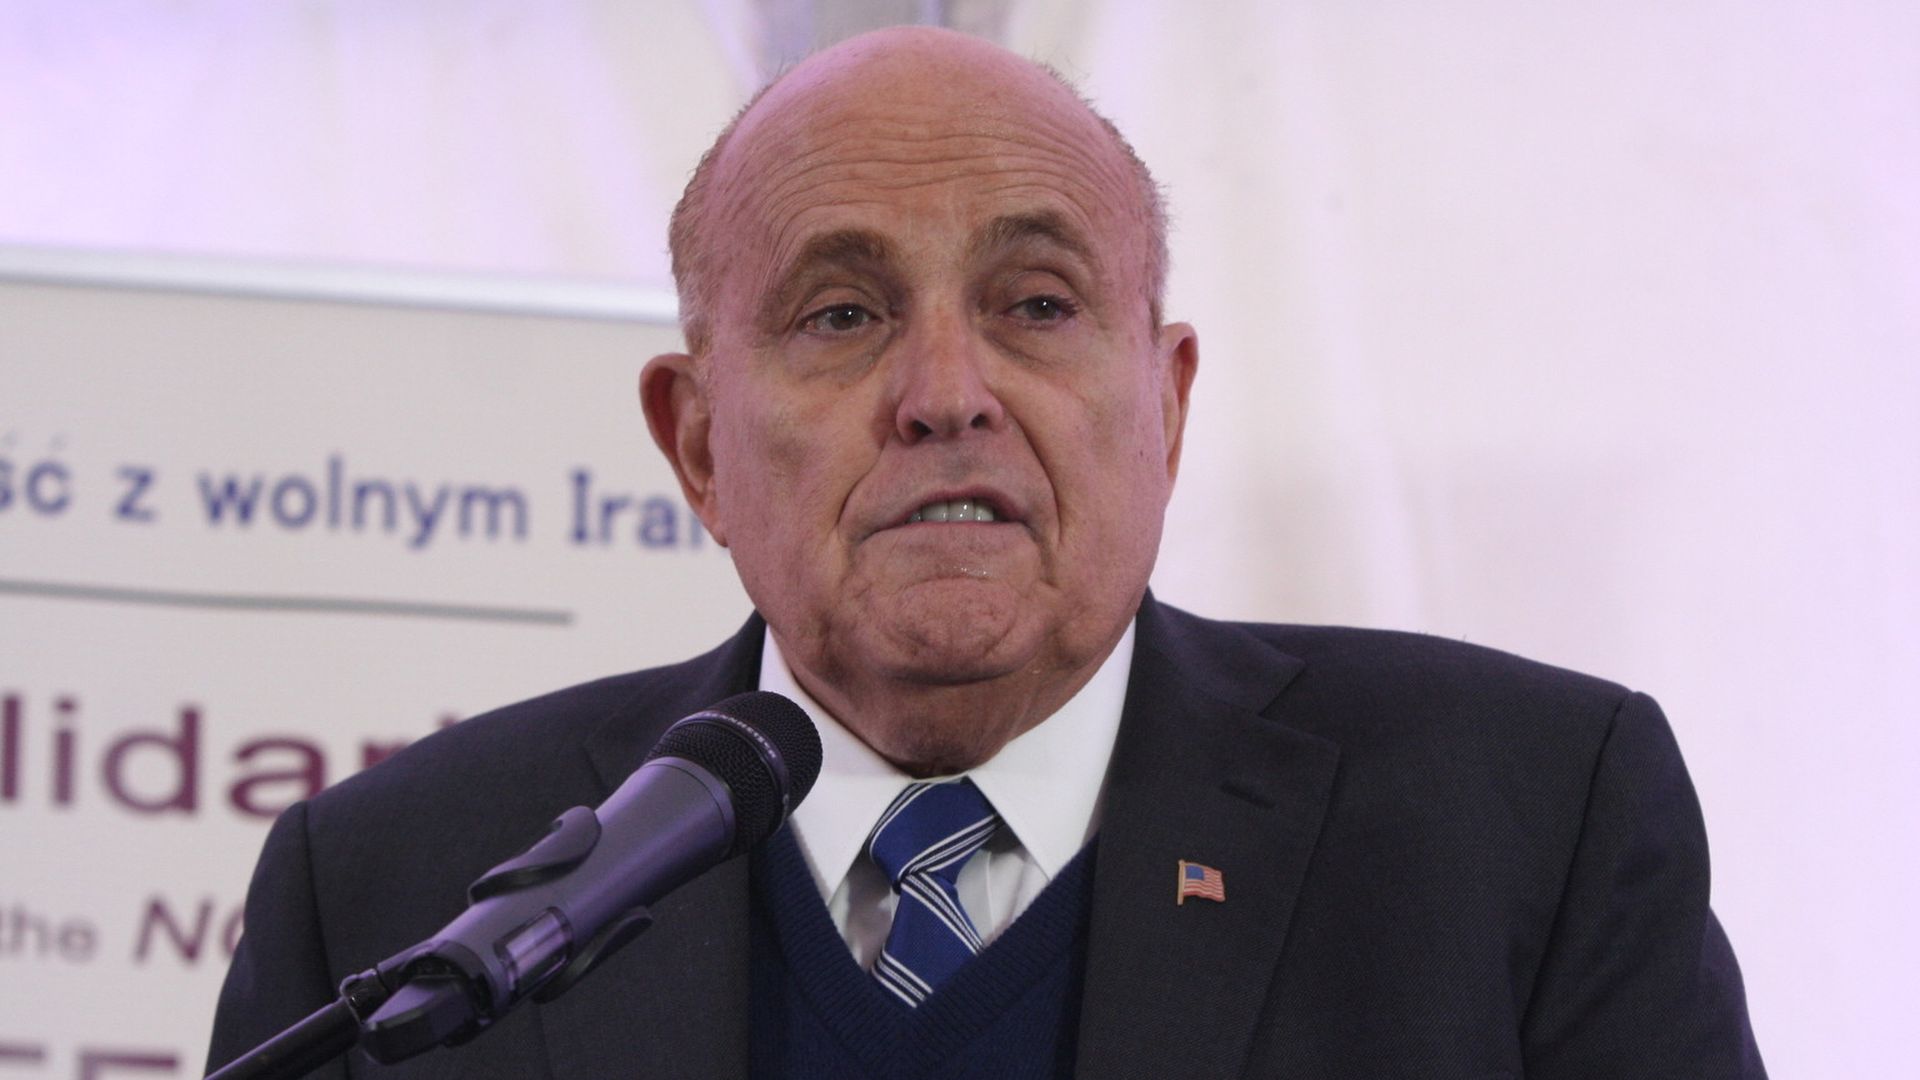 In this image, Rudy speaks into a microphone.